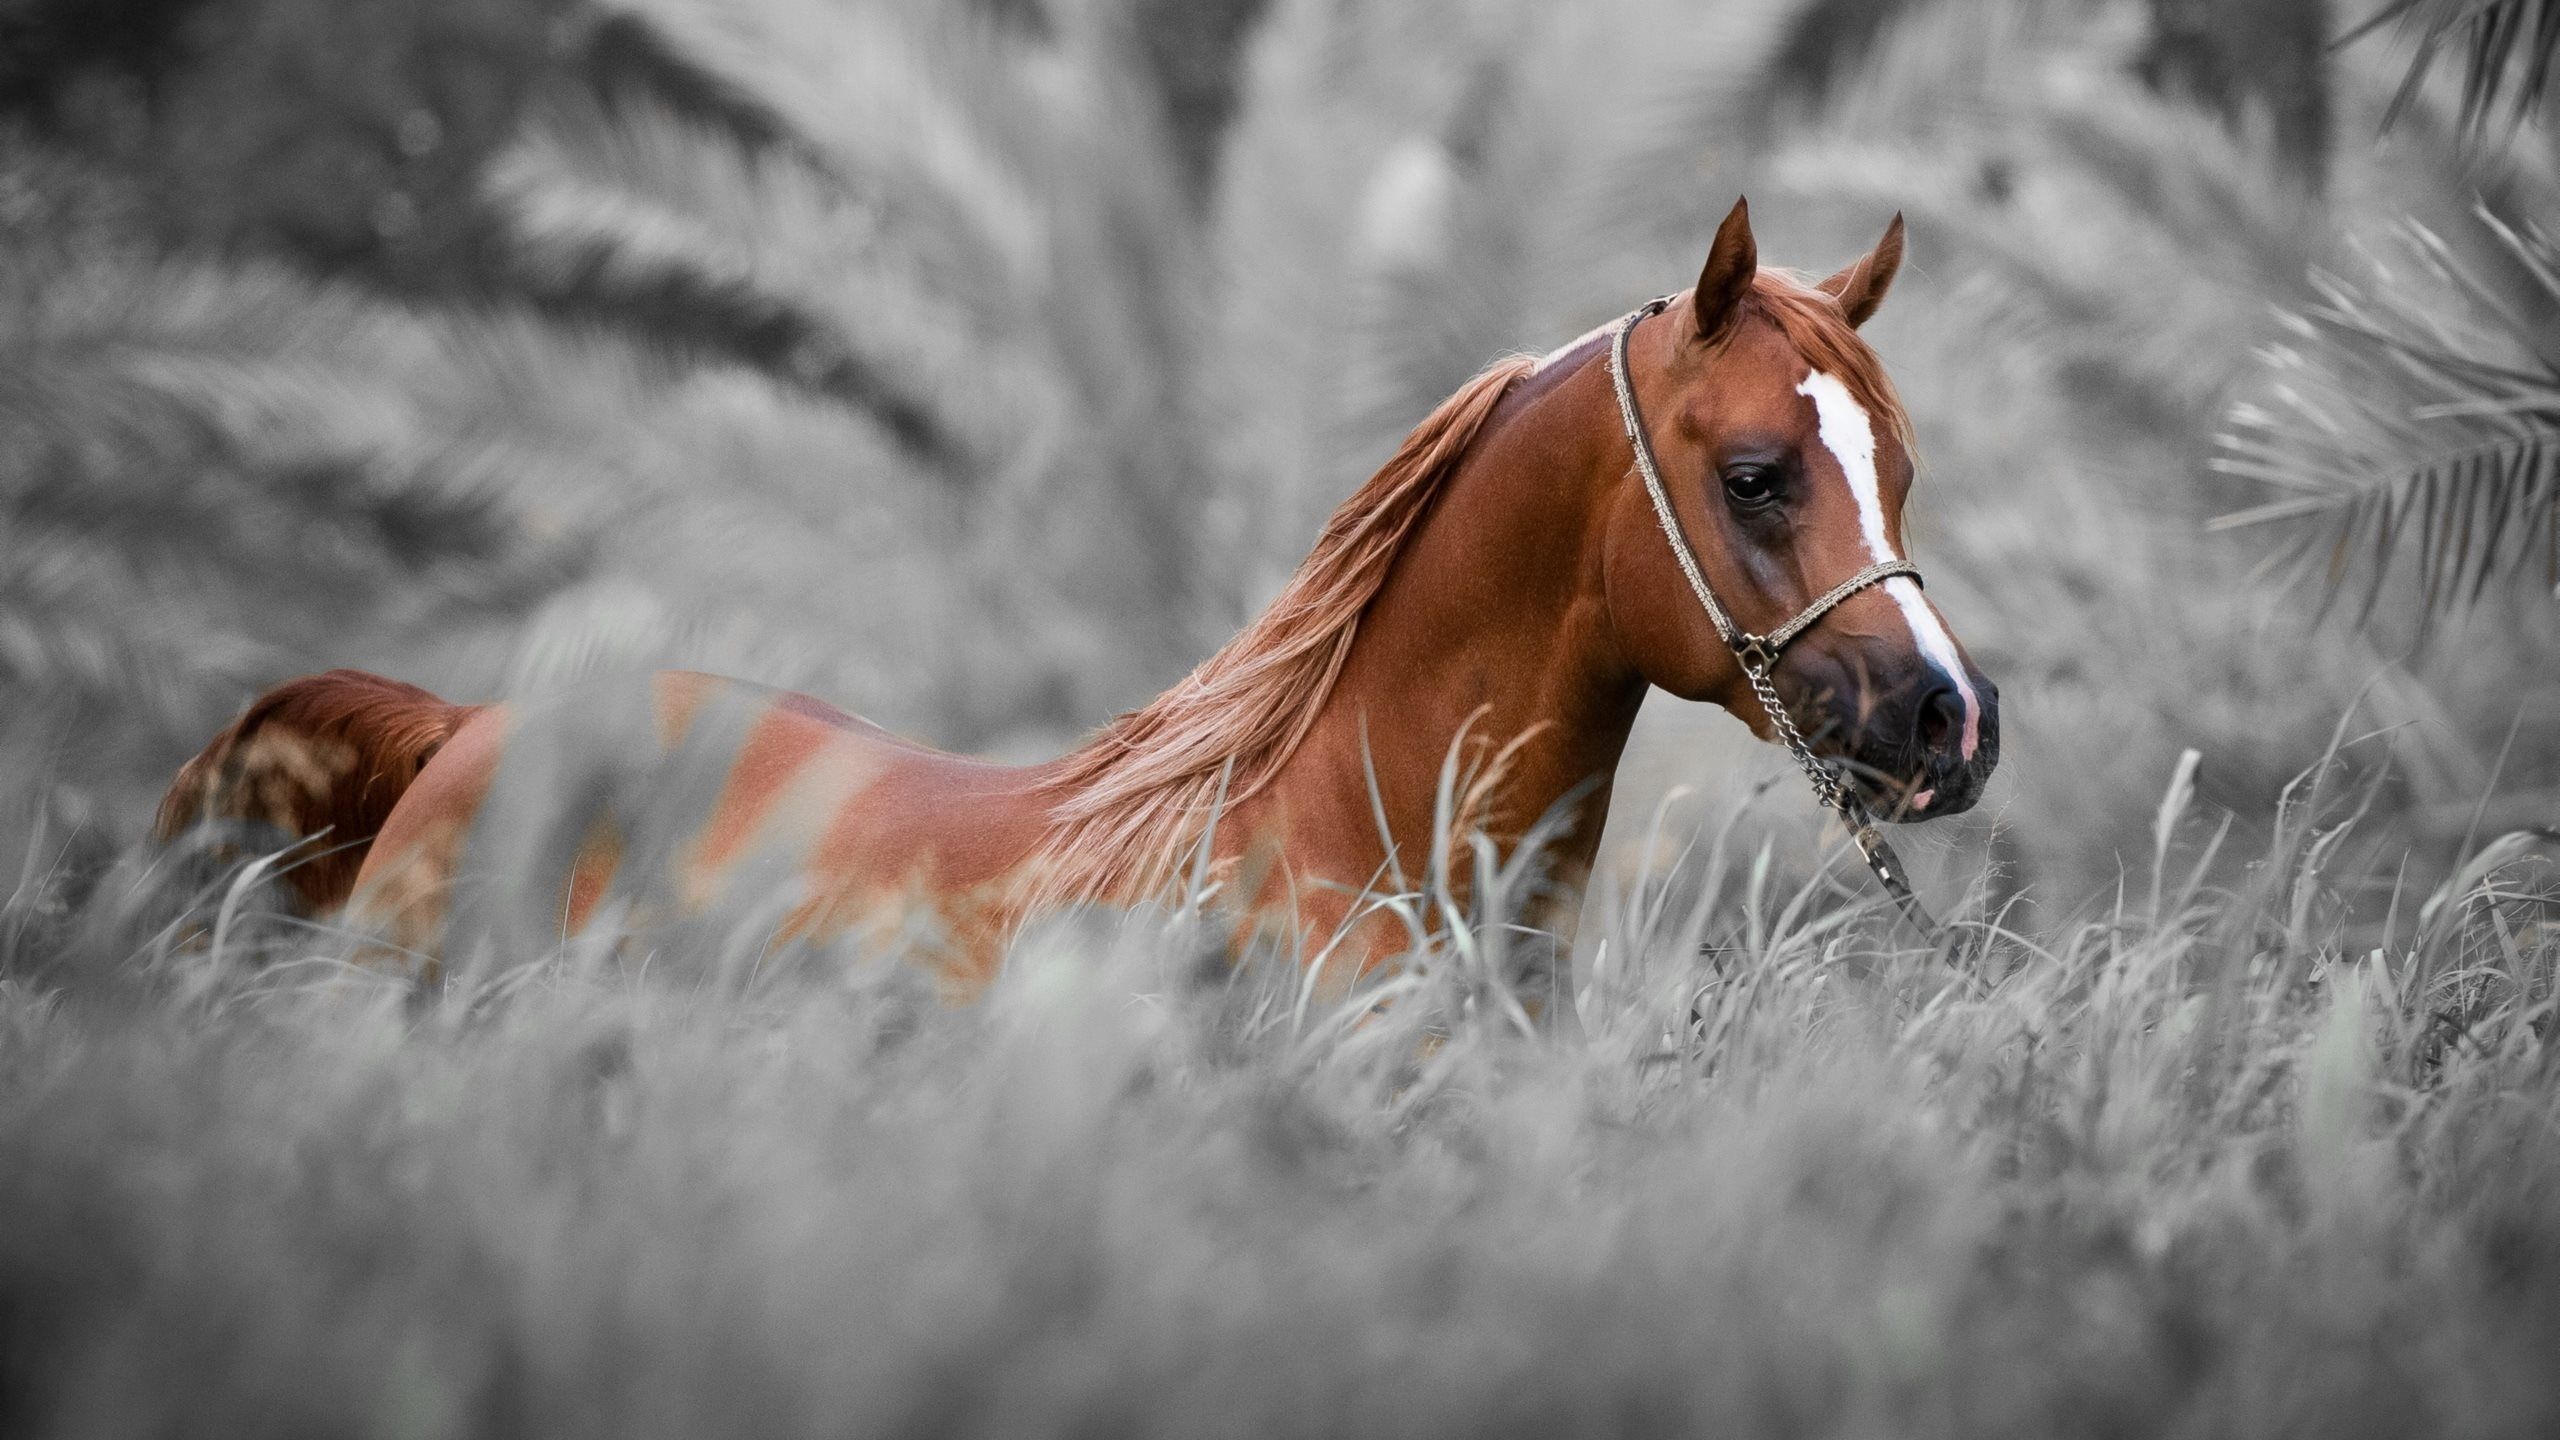 Horse Wallpaper For Windows Nvm Animals In